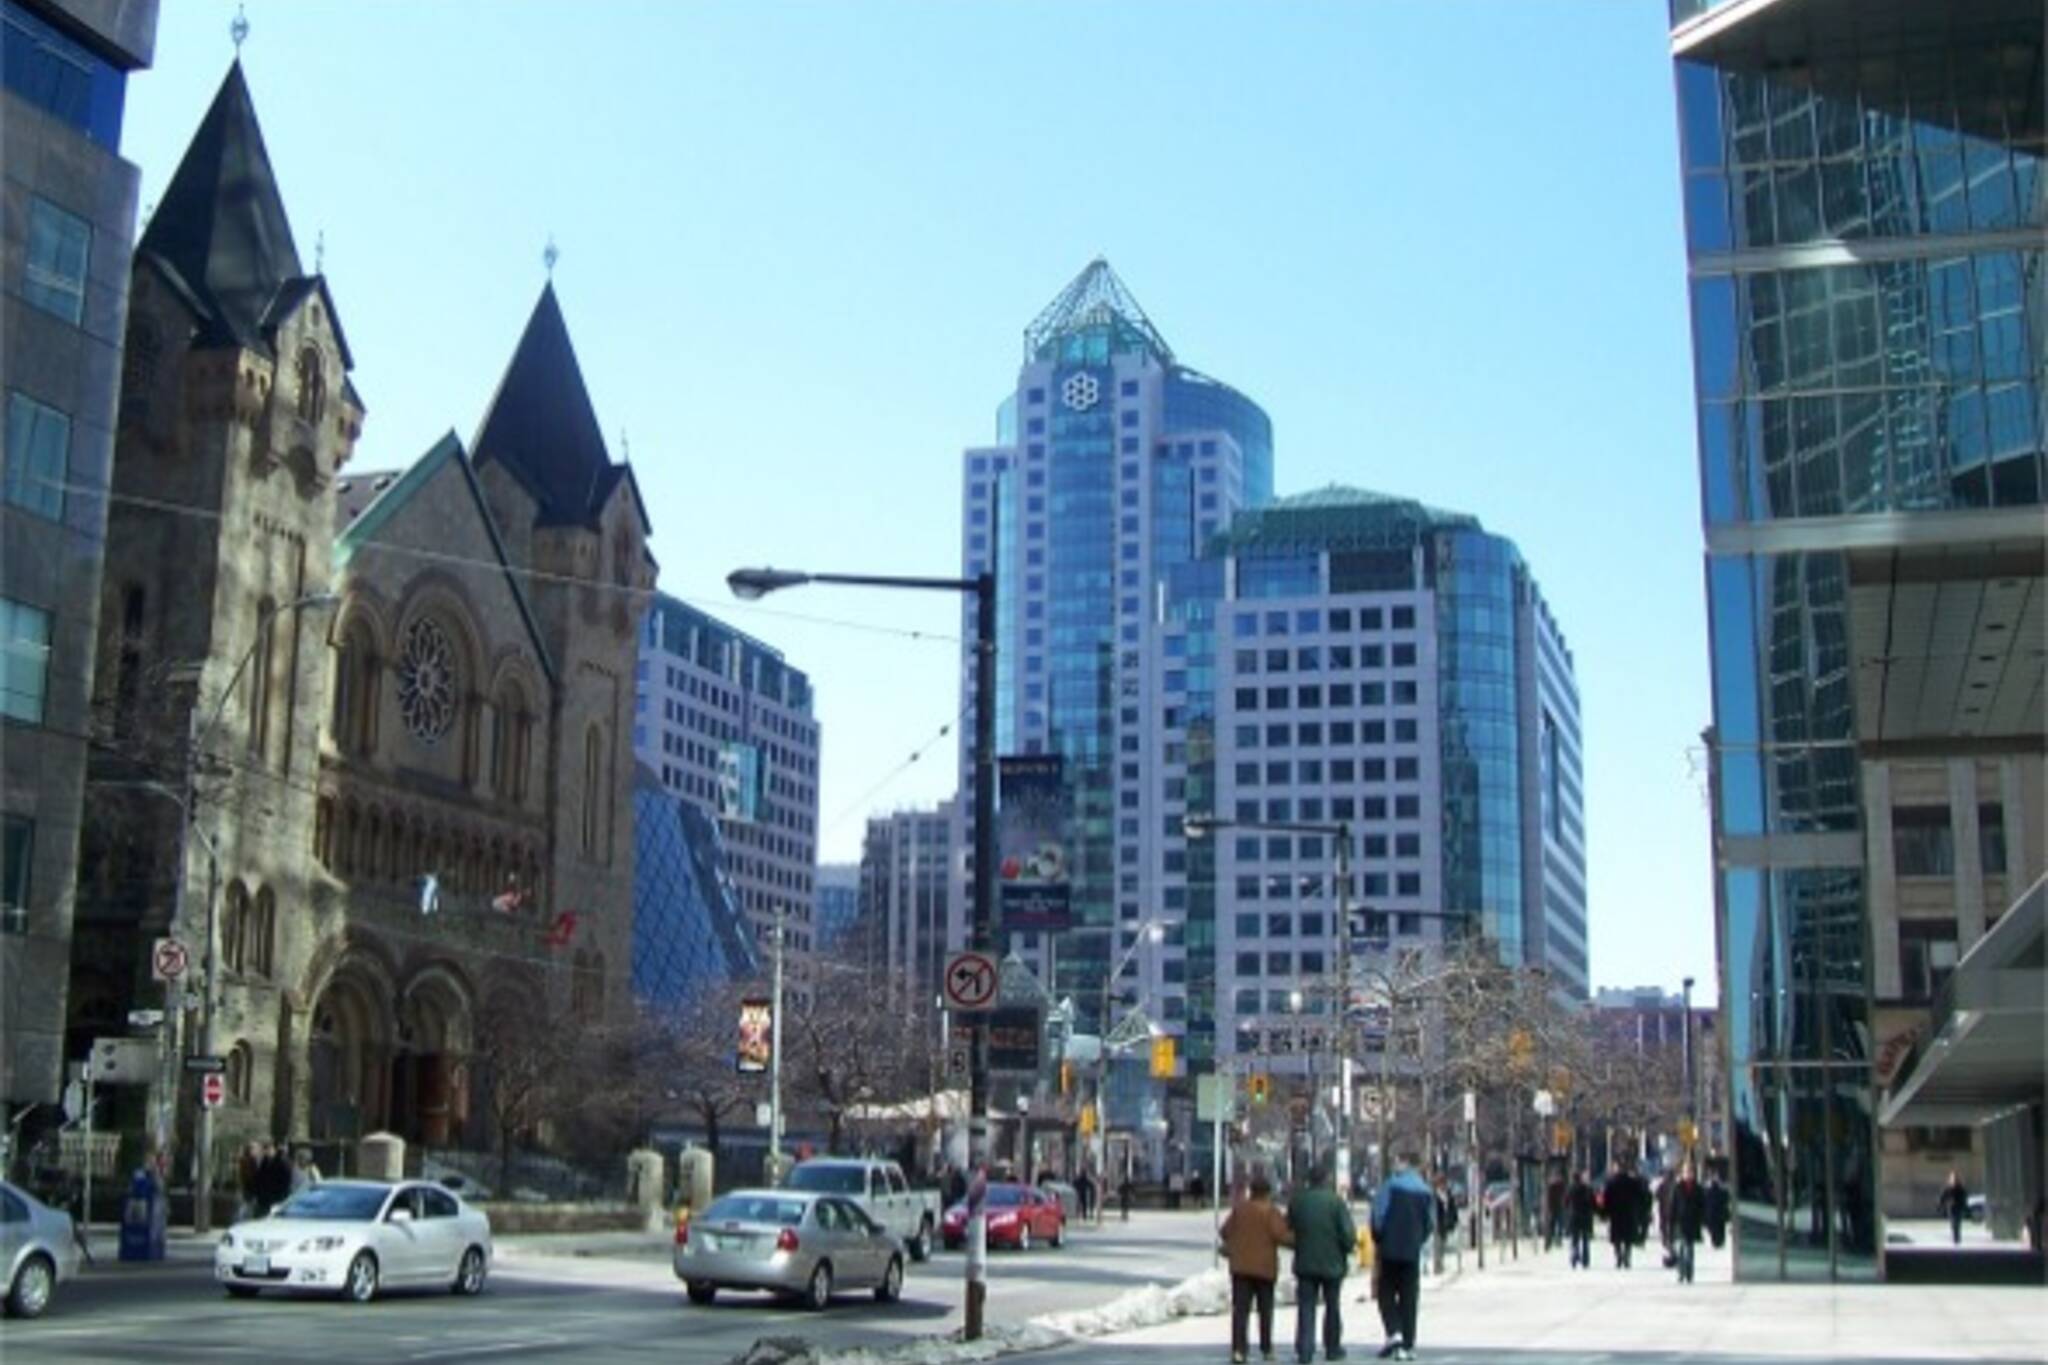 King and Simcoe, showing Roy Thomson Hall, Metro Hall, and St. Andrew's Church